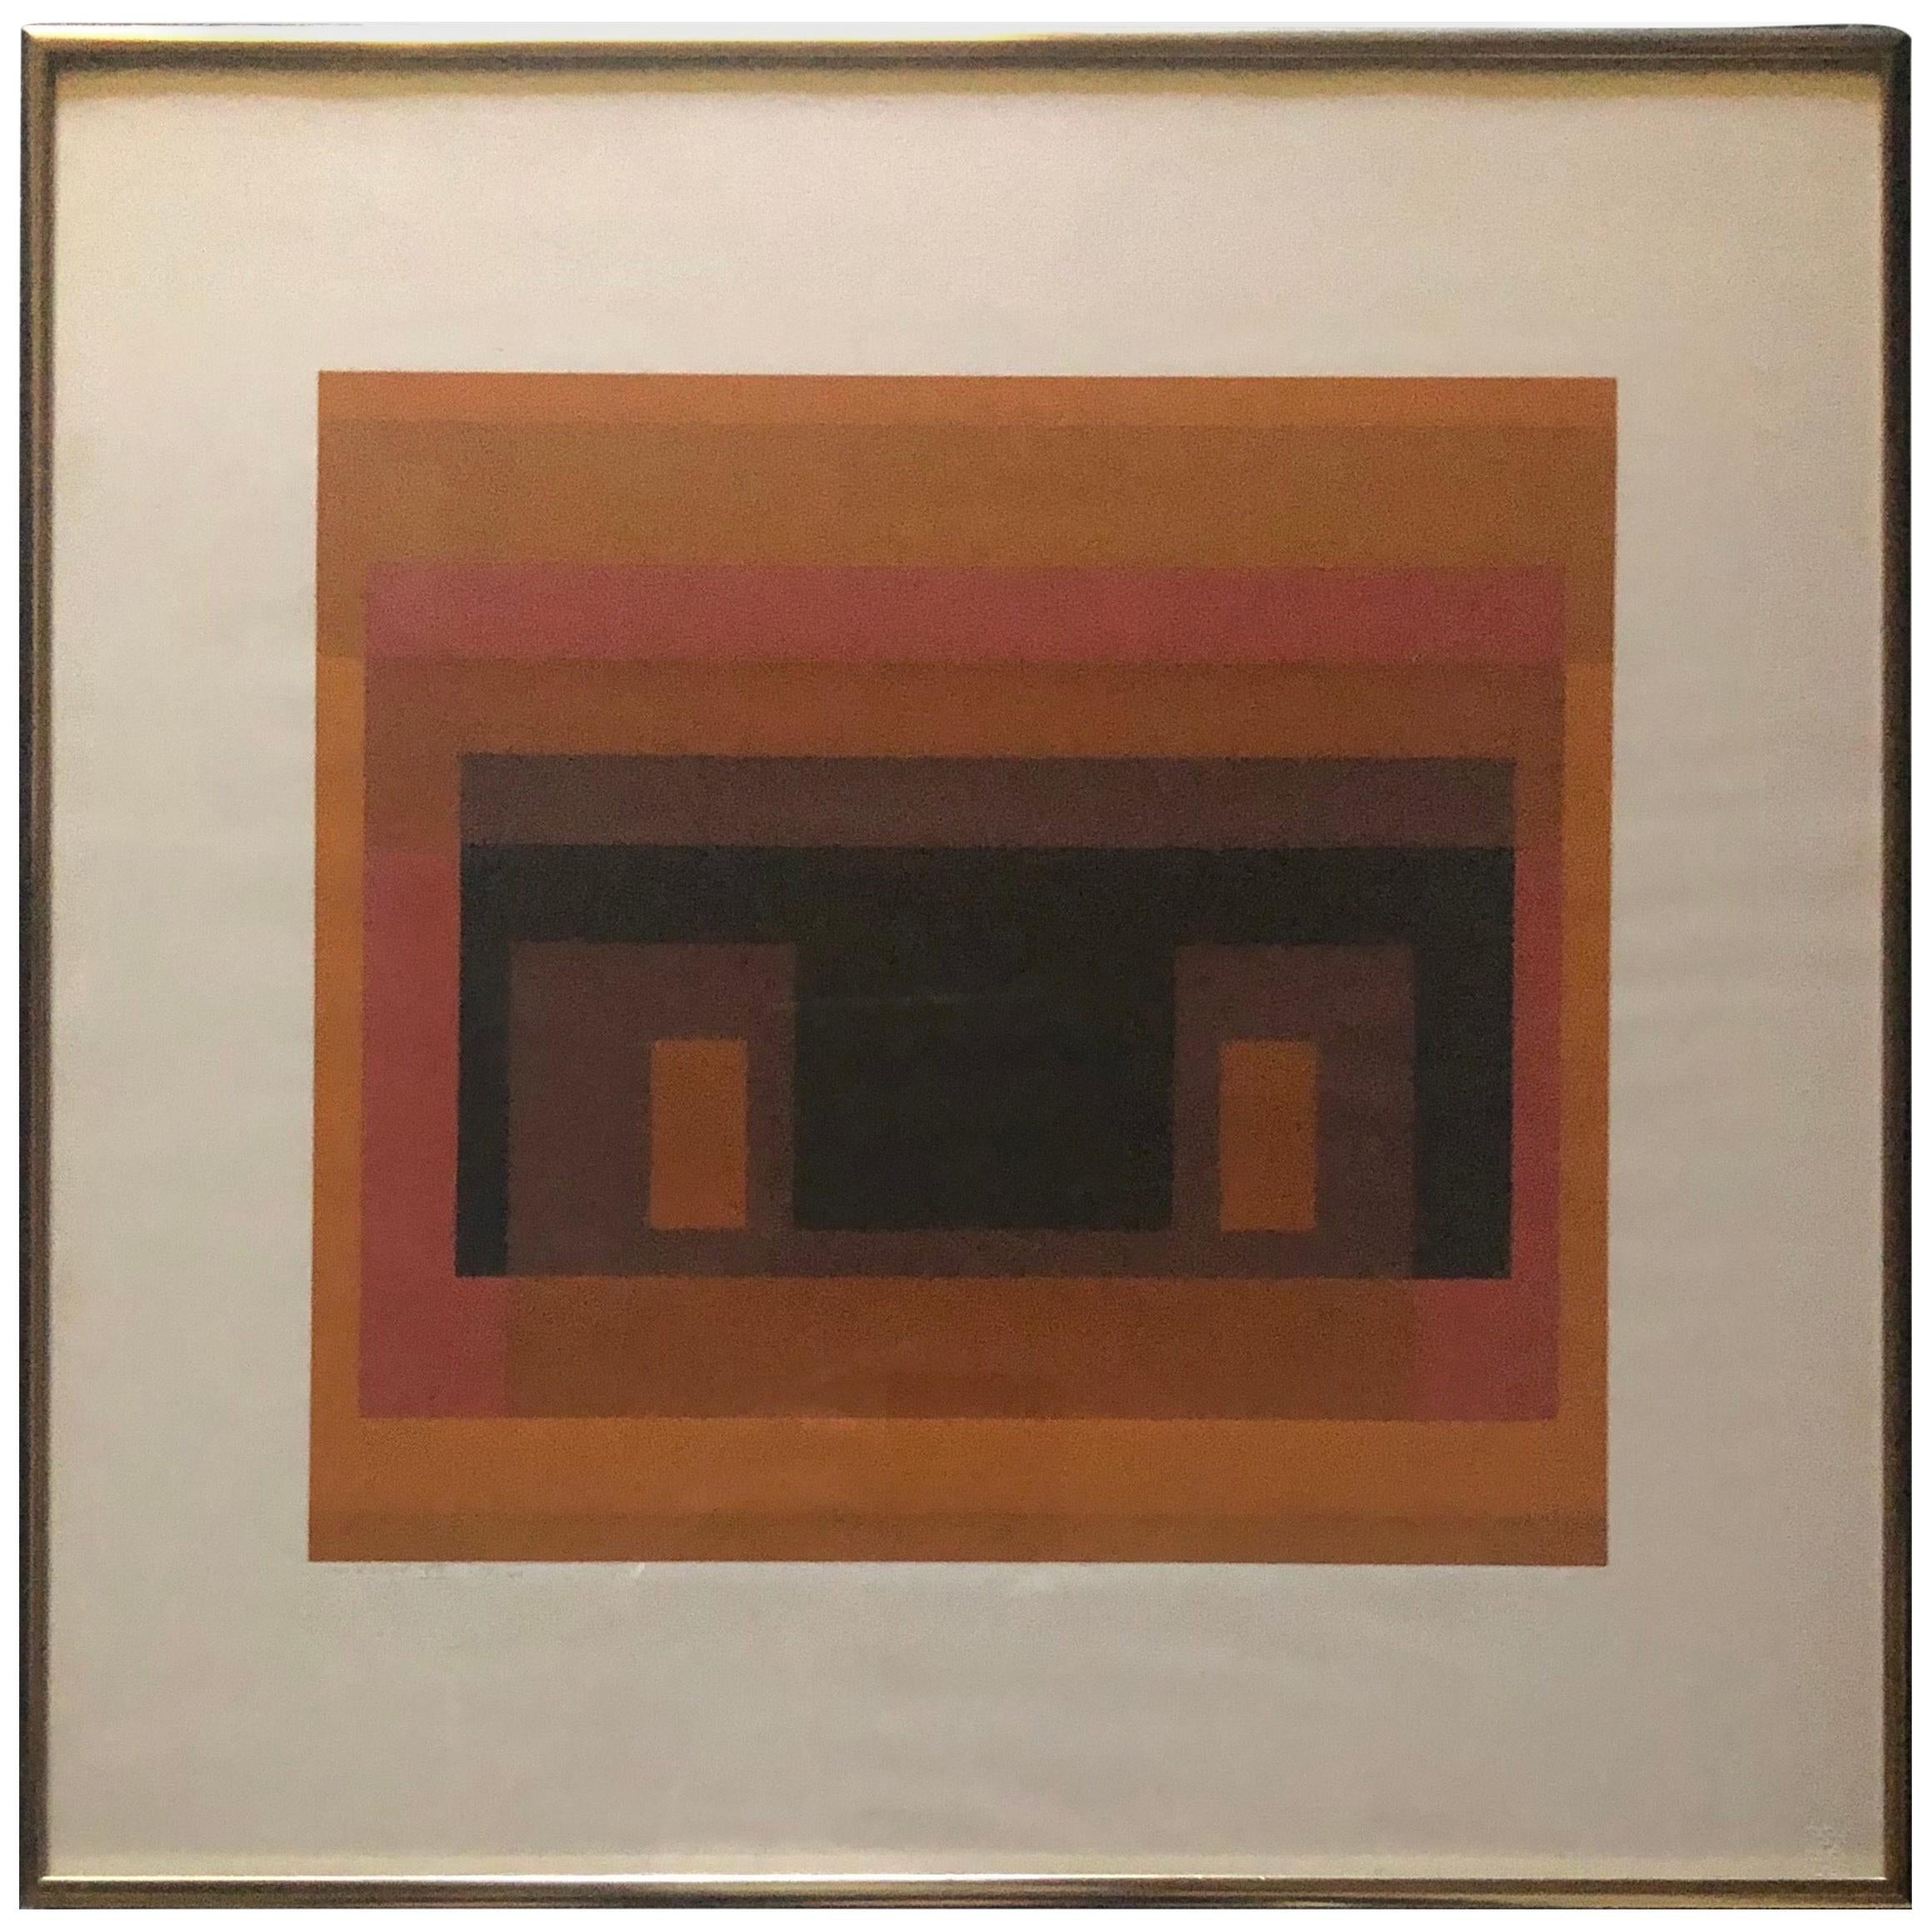 Abstract Serigraph Entitled "Variant VIII from Ten Variants" by Josef Albers